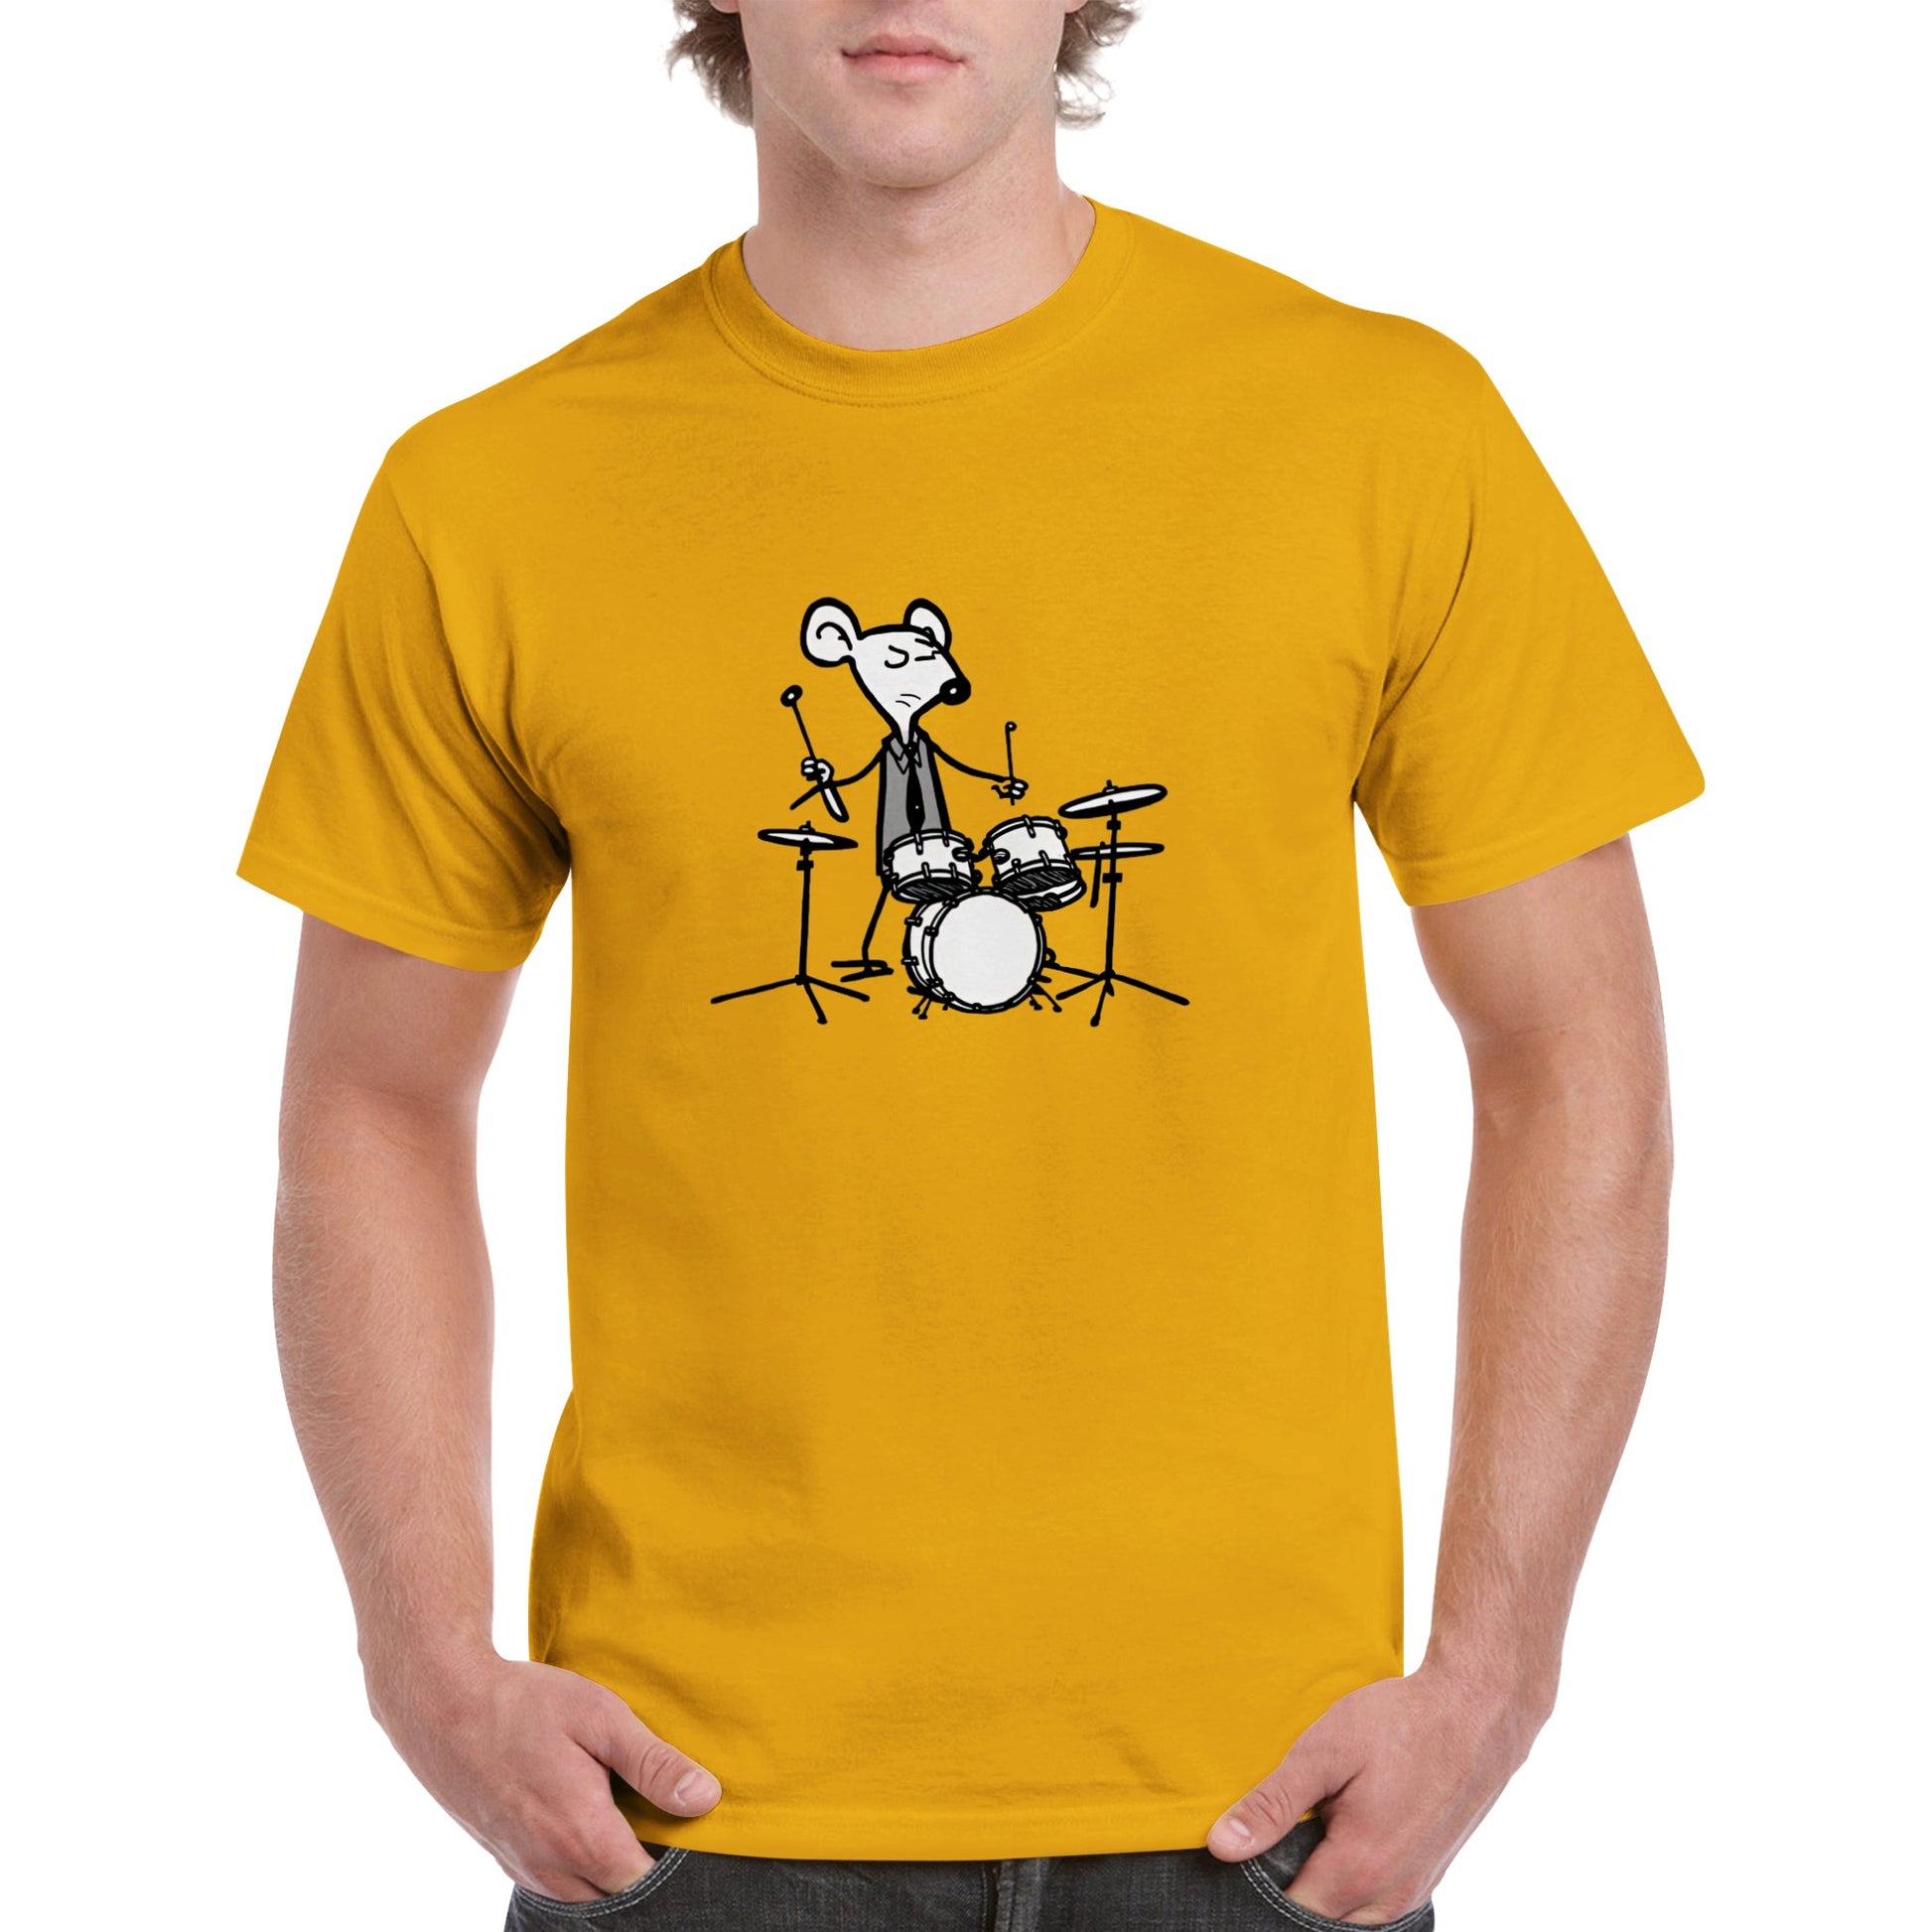 guy a yellow t-shirt with a mouse playing drums print